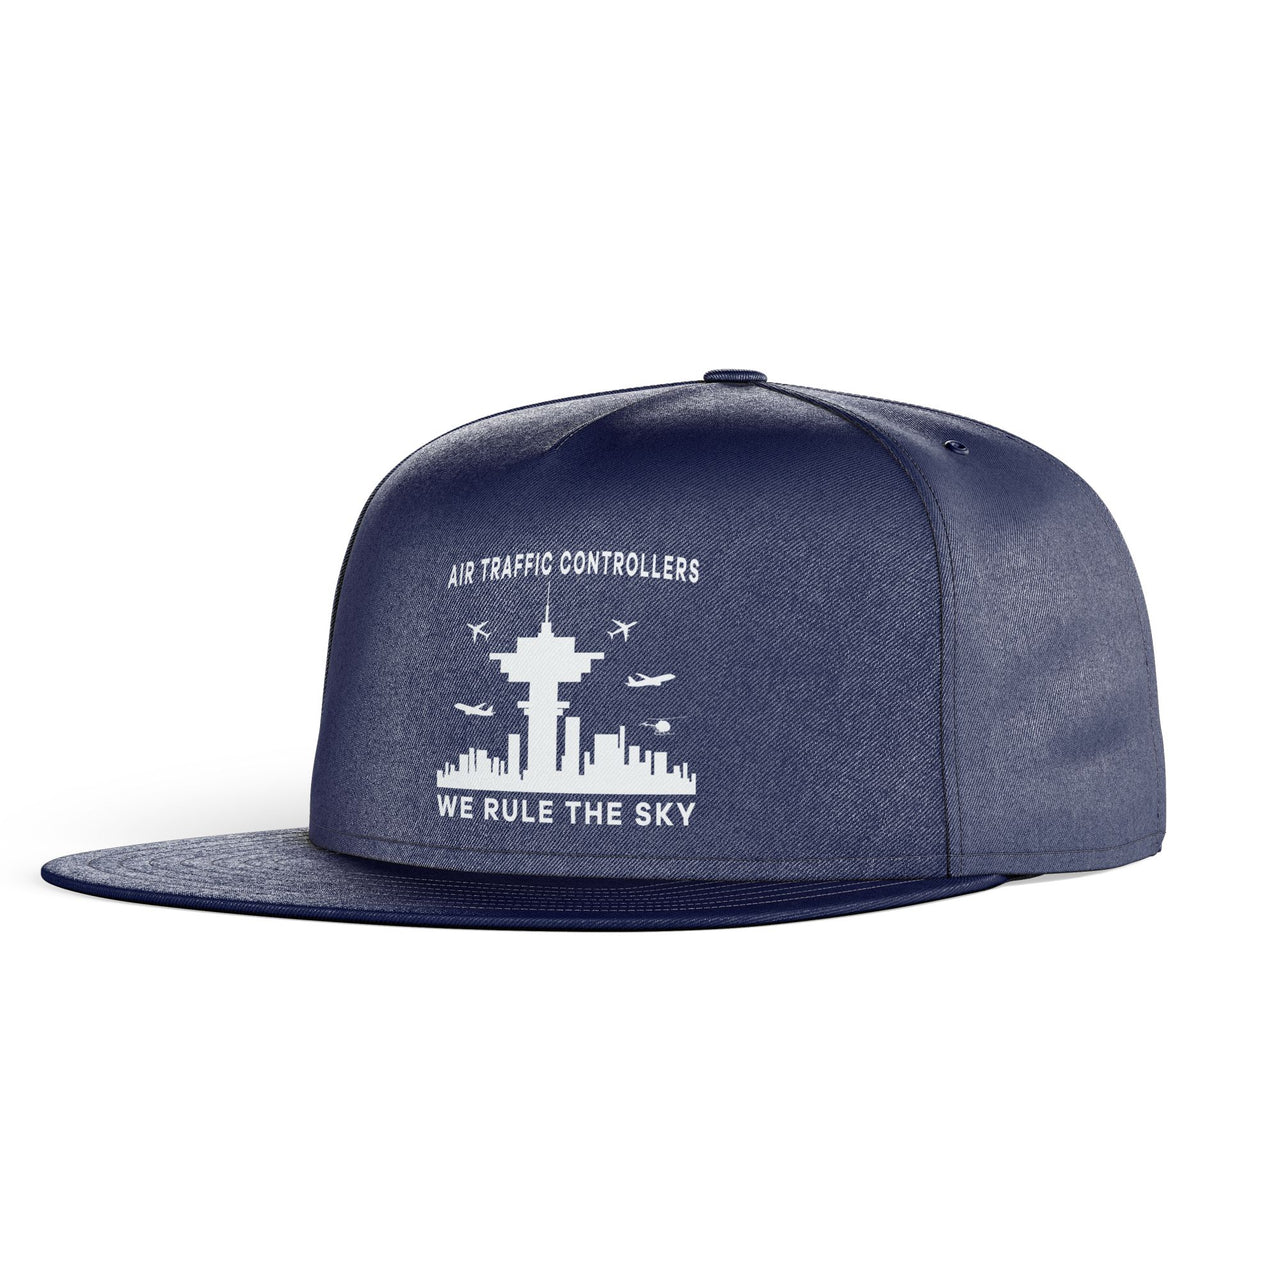 Air Traffic Controllers - We Rule The Sky Designed Snapback Caps & Hats